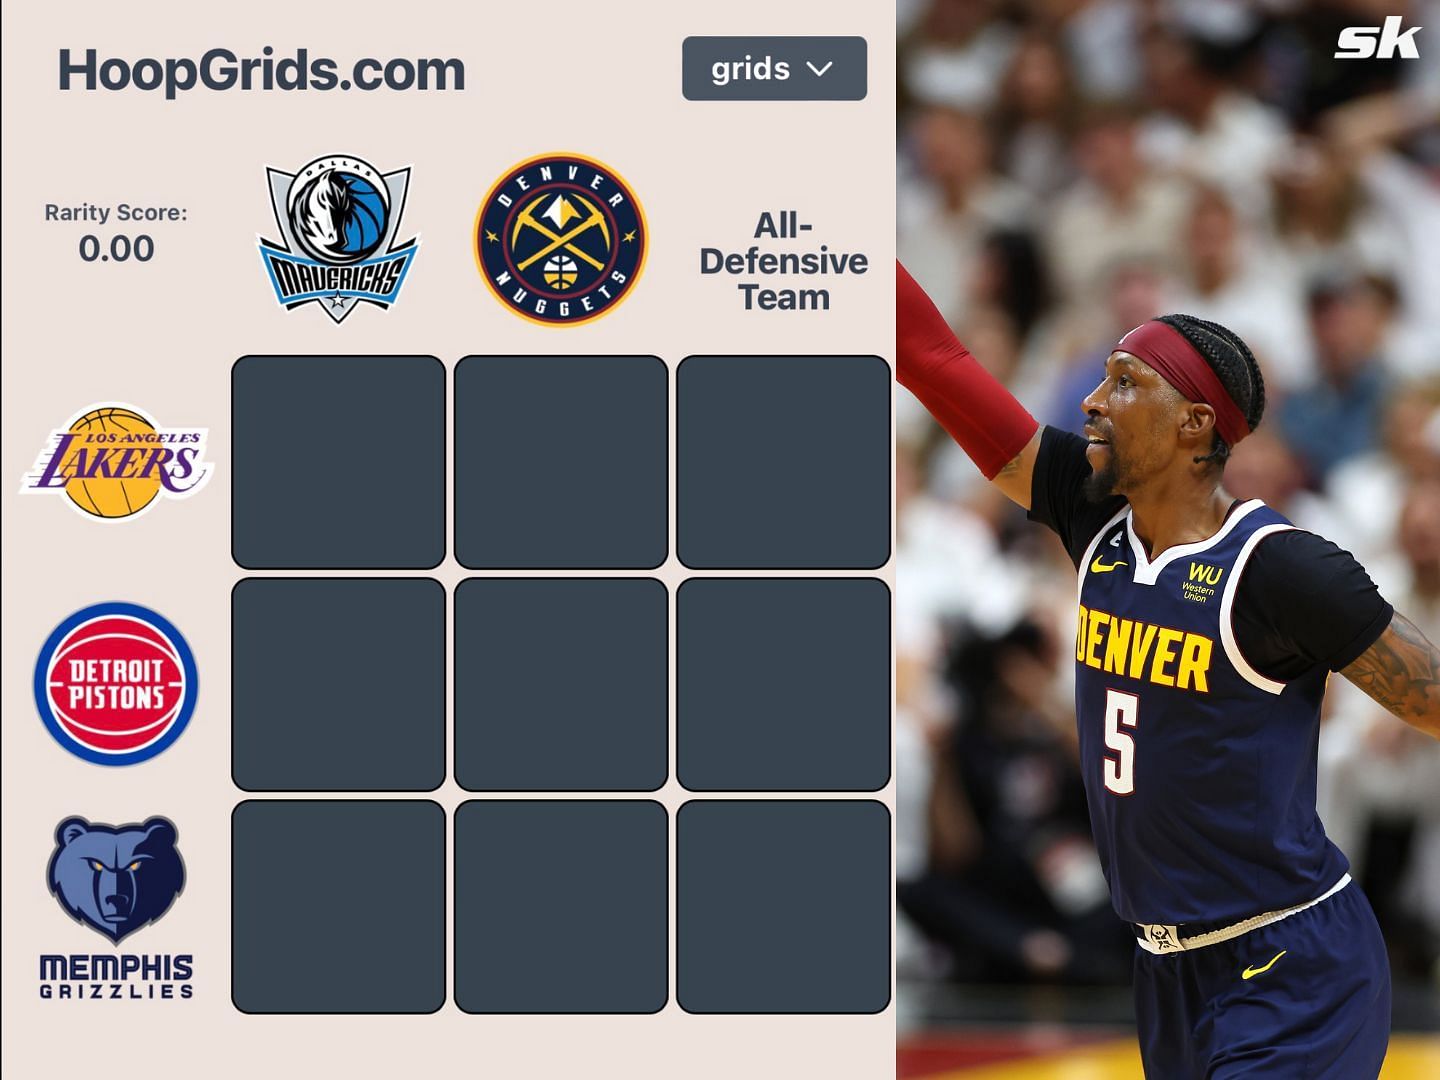 Which Nuggets stars also played for the Lakers and the Pistons? NBA HoopGrids answers for July 17